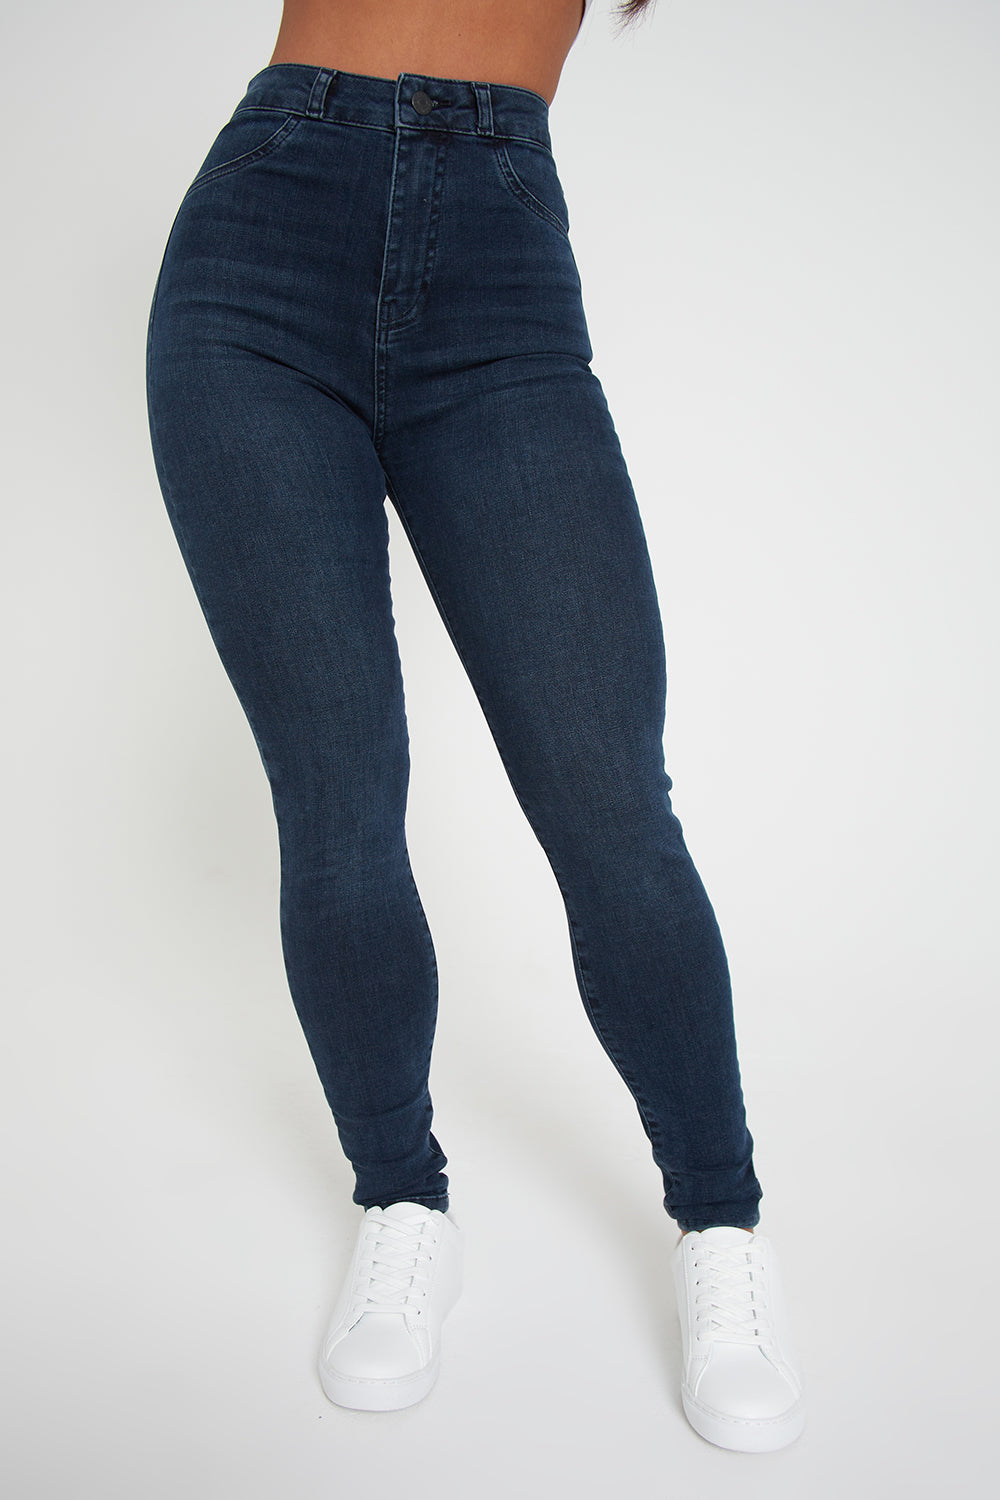 Tailored Athlete High Waisted Jeans in Dark Blue, M